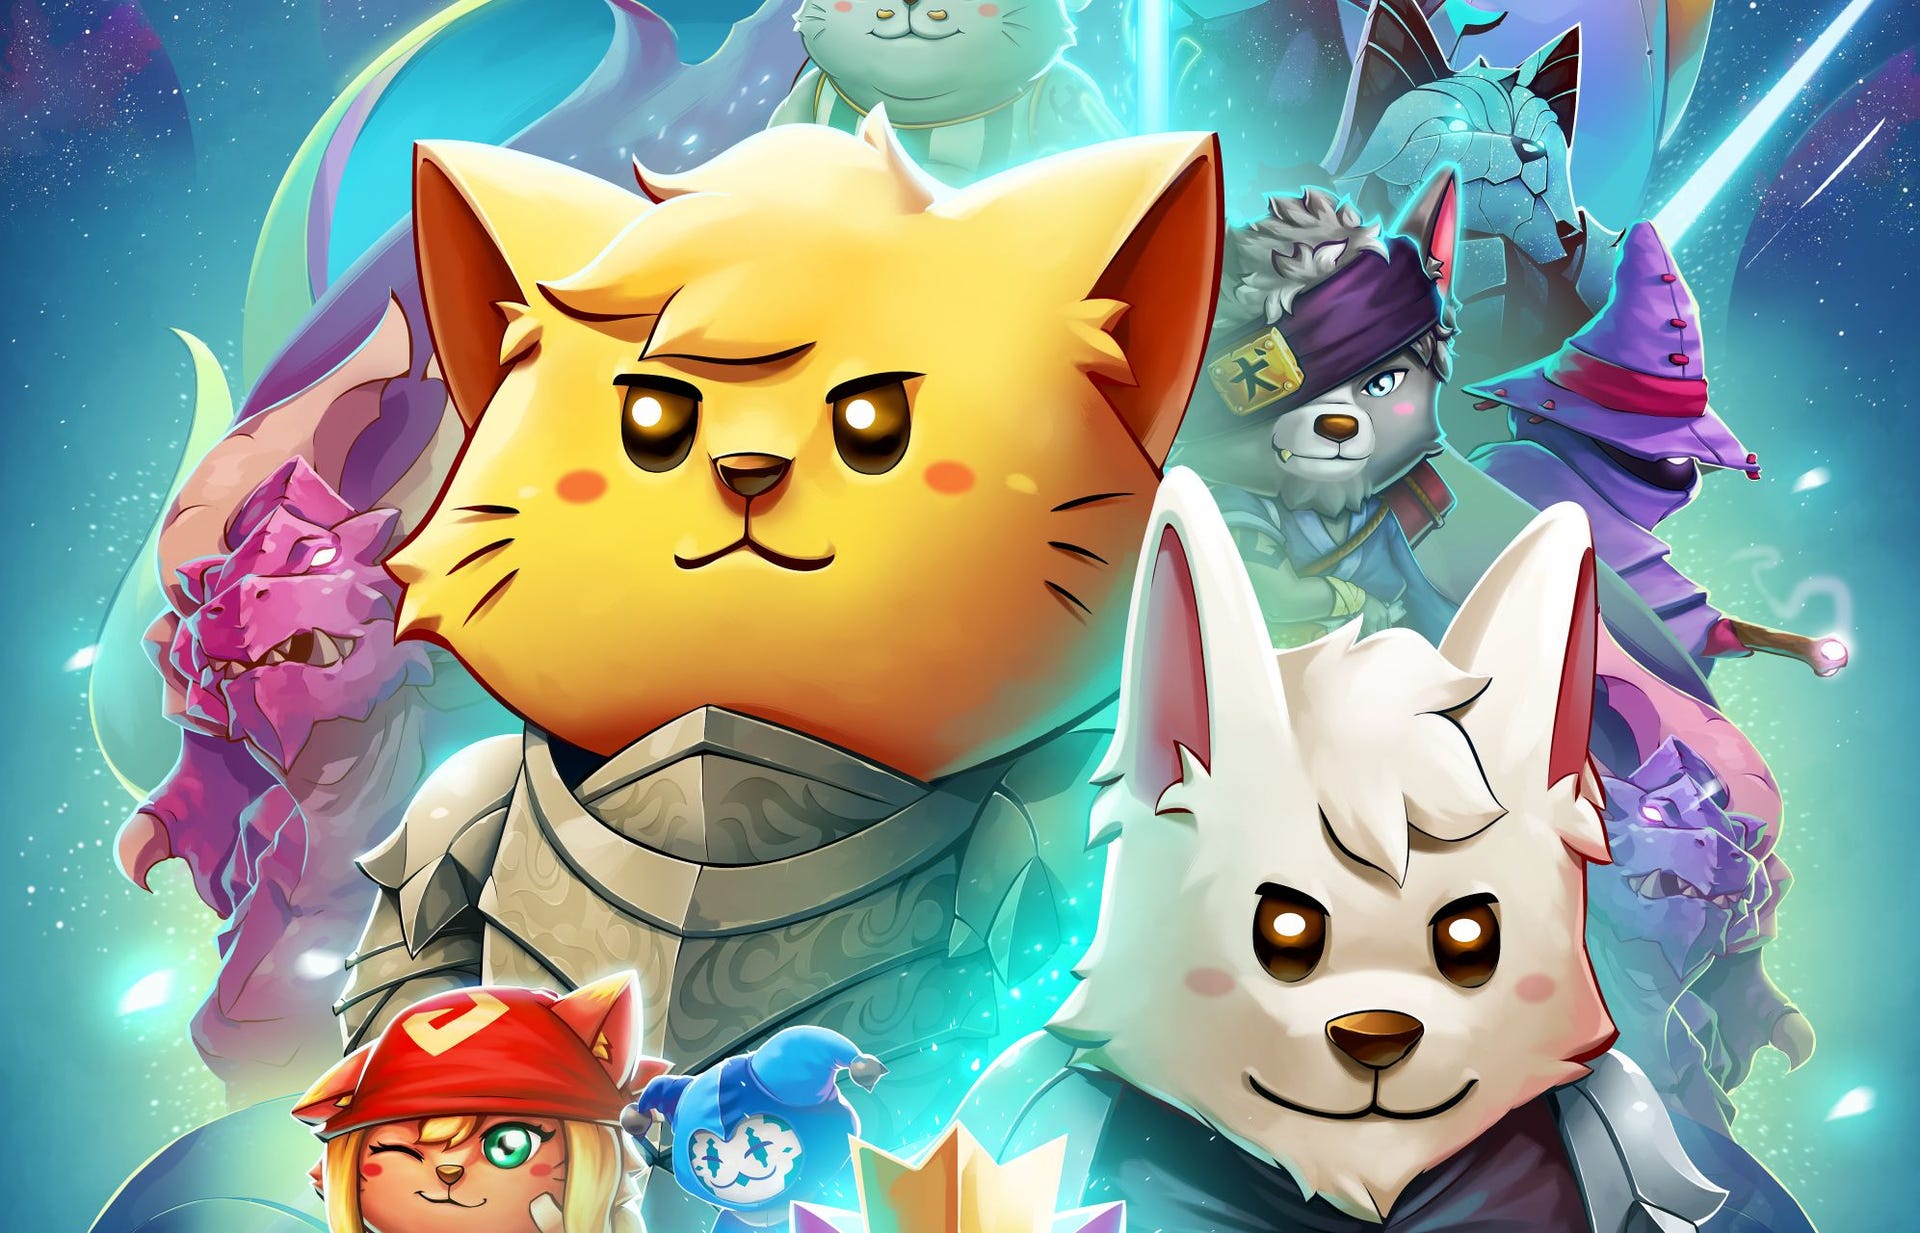 Claim Cat Quest 2 and Orcs Must Die 3 free on the Epic Games Store now through May 9